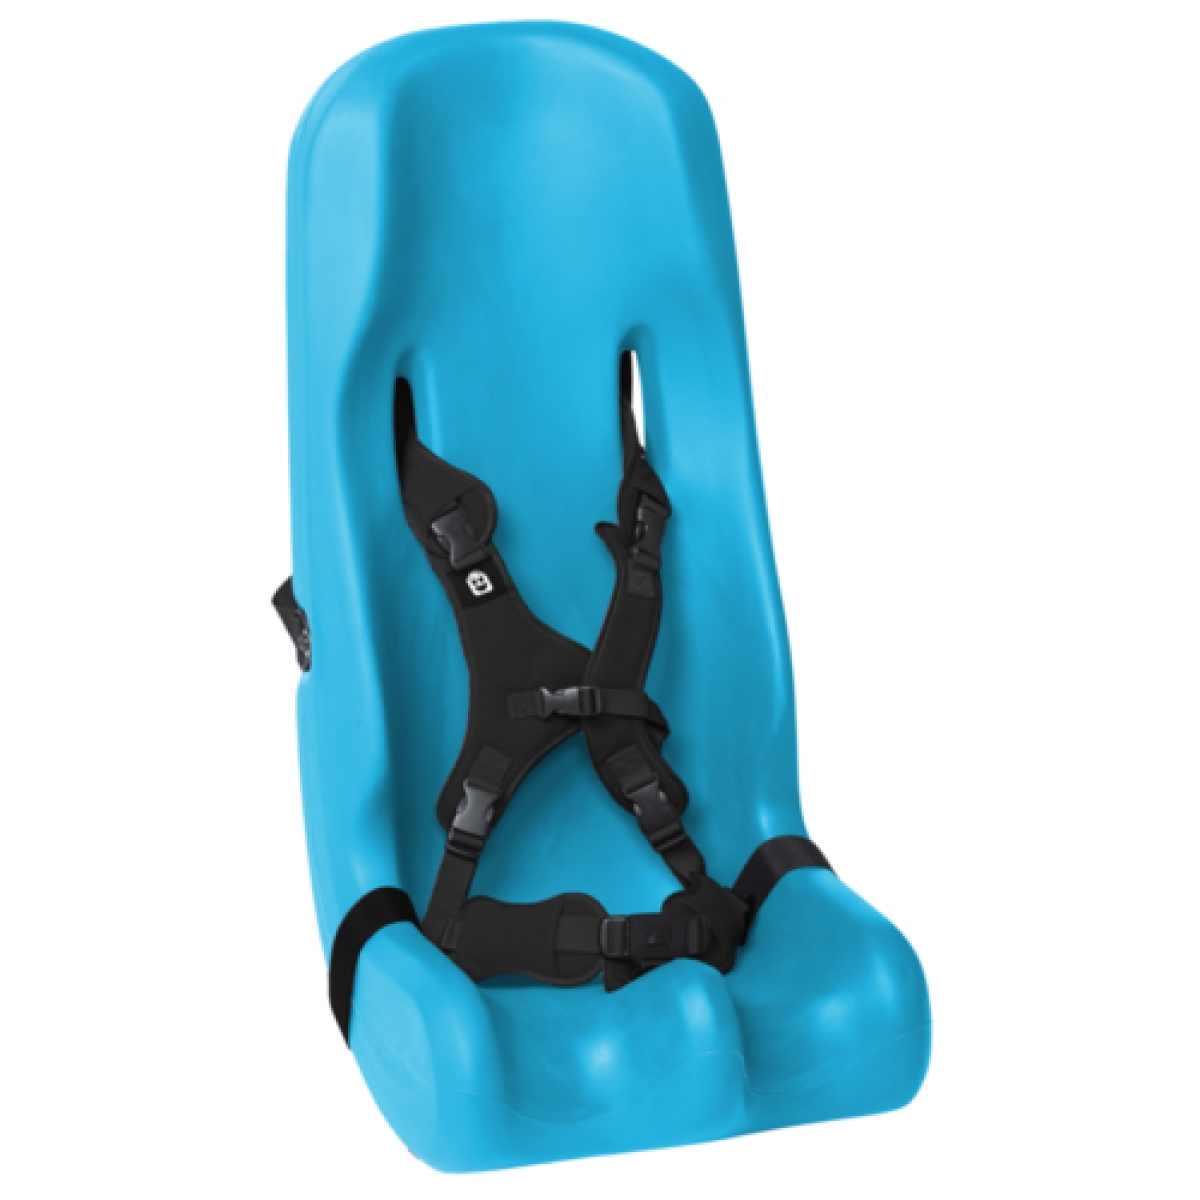 https://www.autism-products.com/wp-content/uploads/Special-Needs-Booster-Seat-in-Aqua-1200x1200.jpg